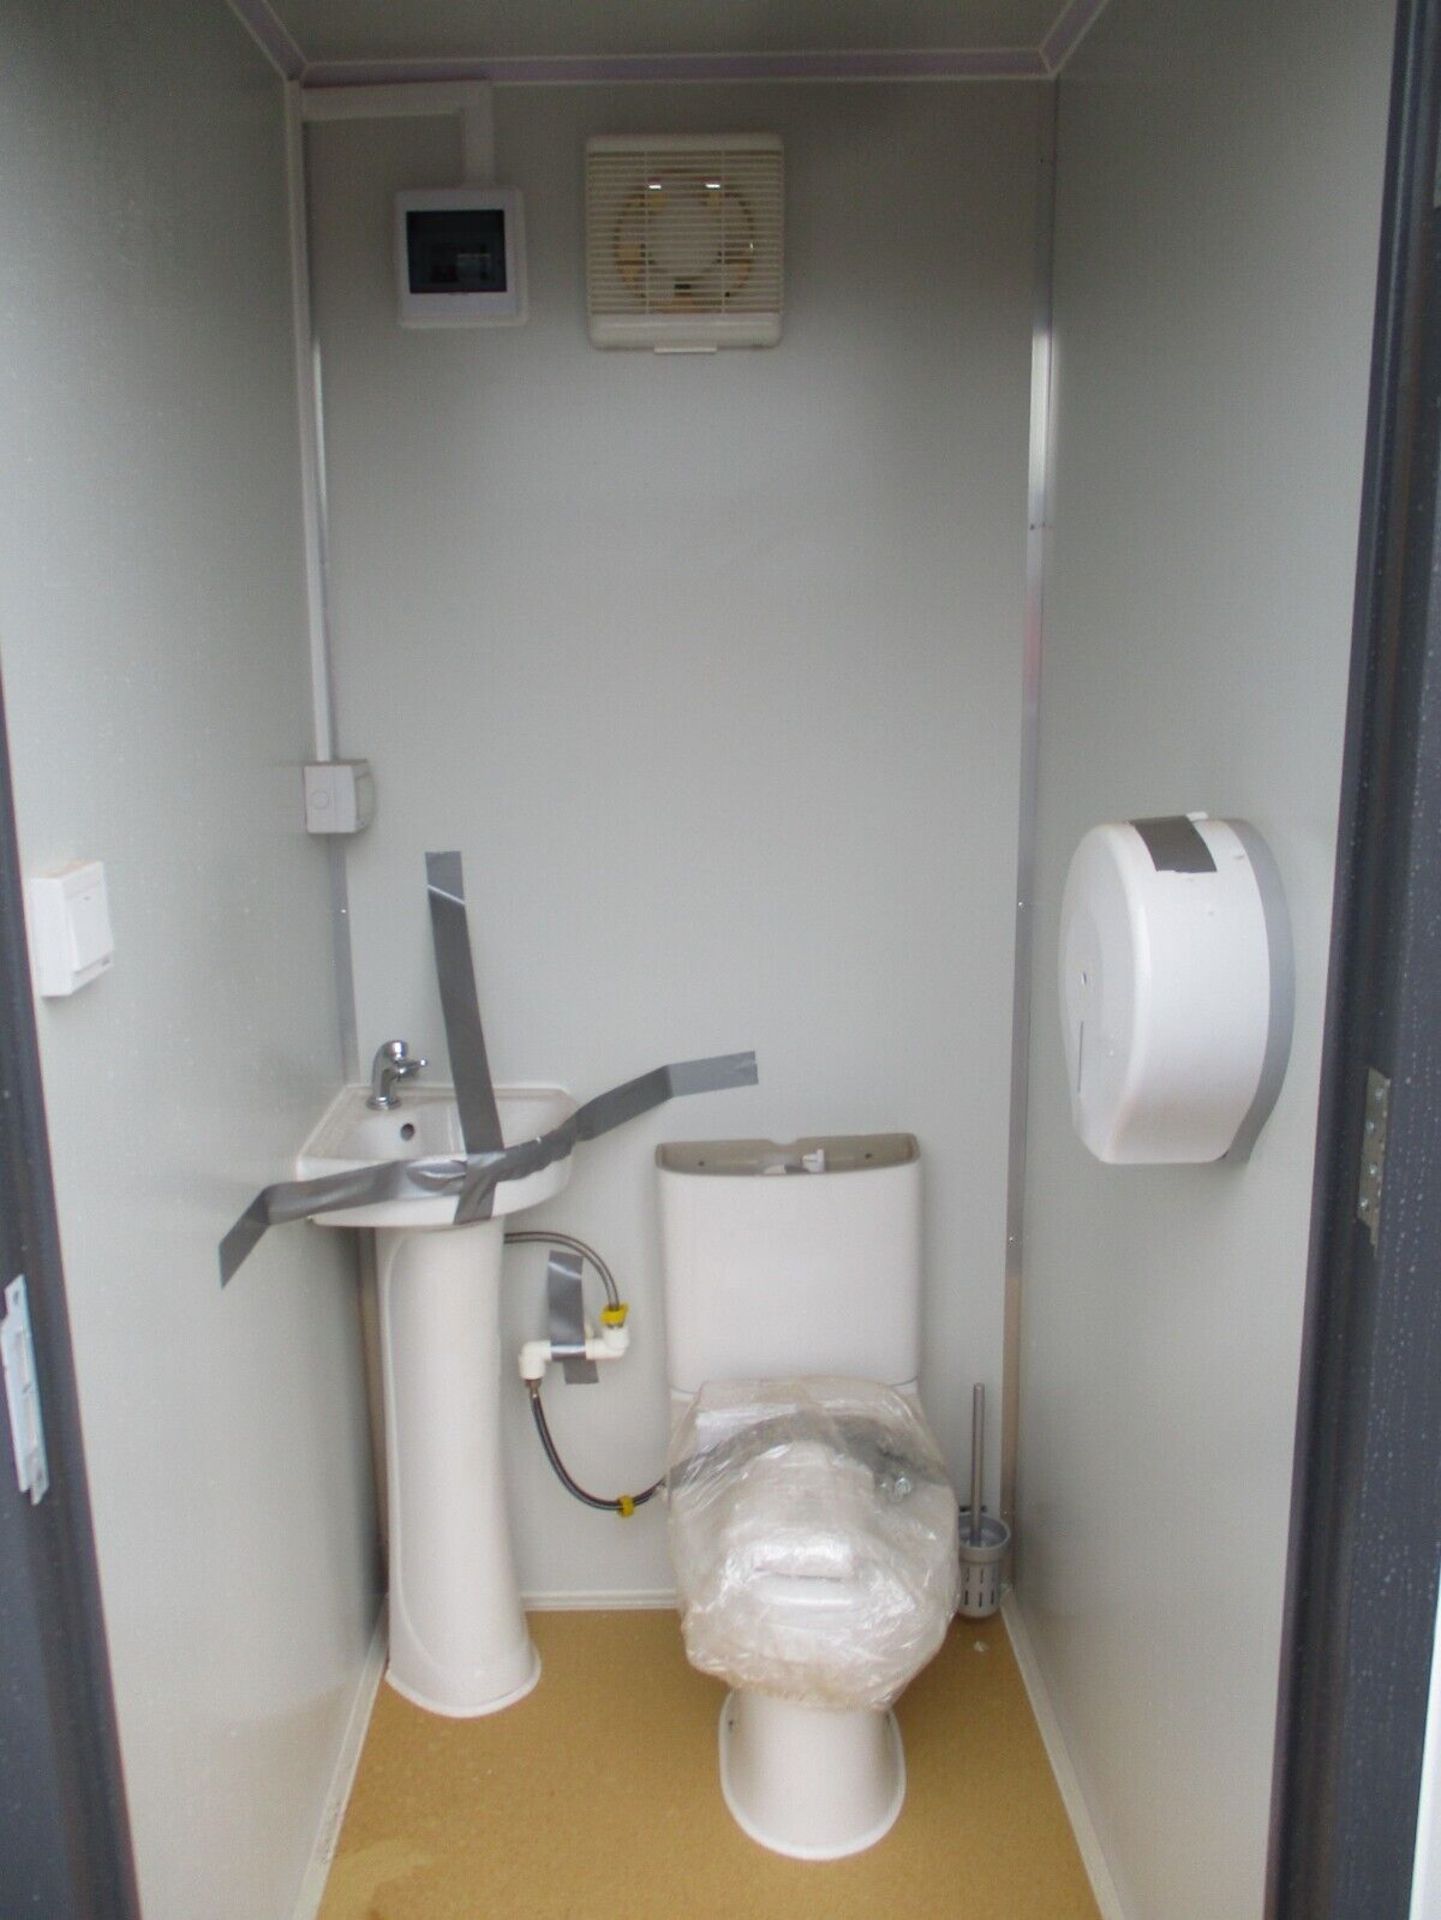 NEW SHIPPING CONTAINER TOILET BLOCK - Image 5 of 5